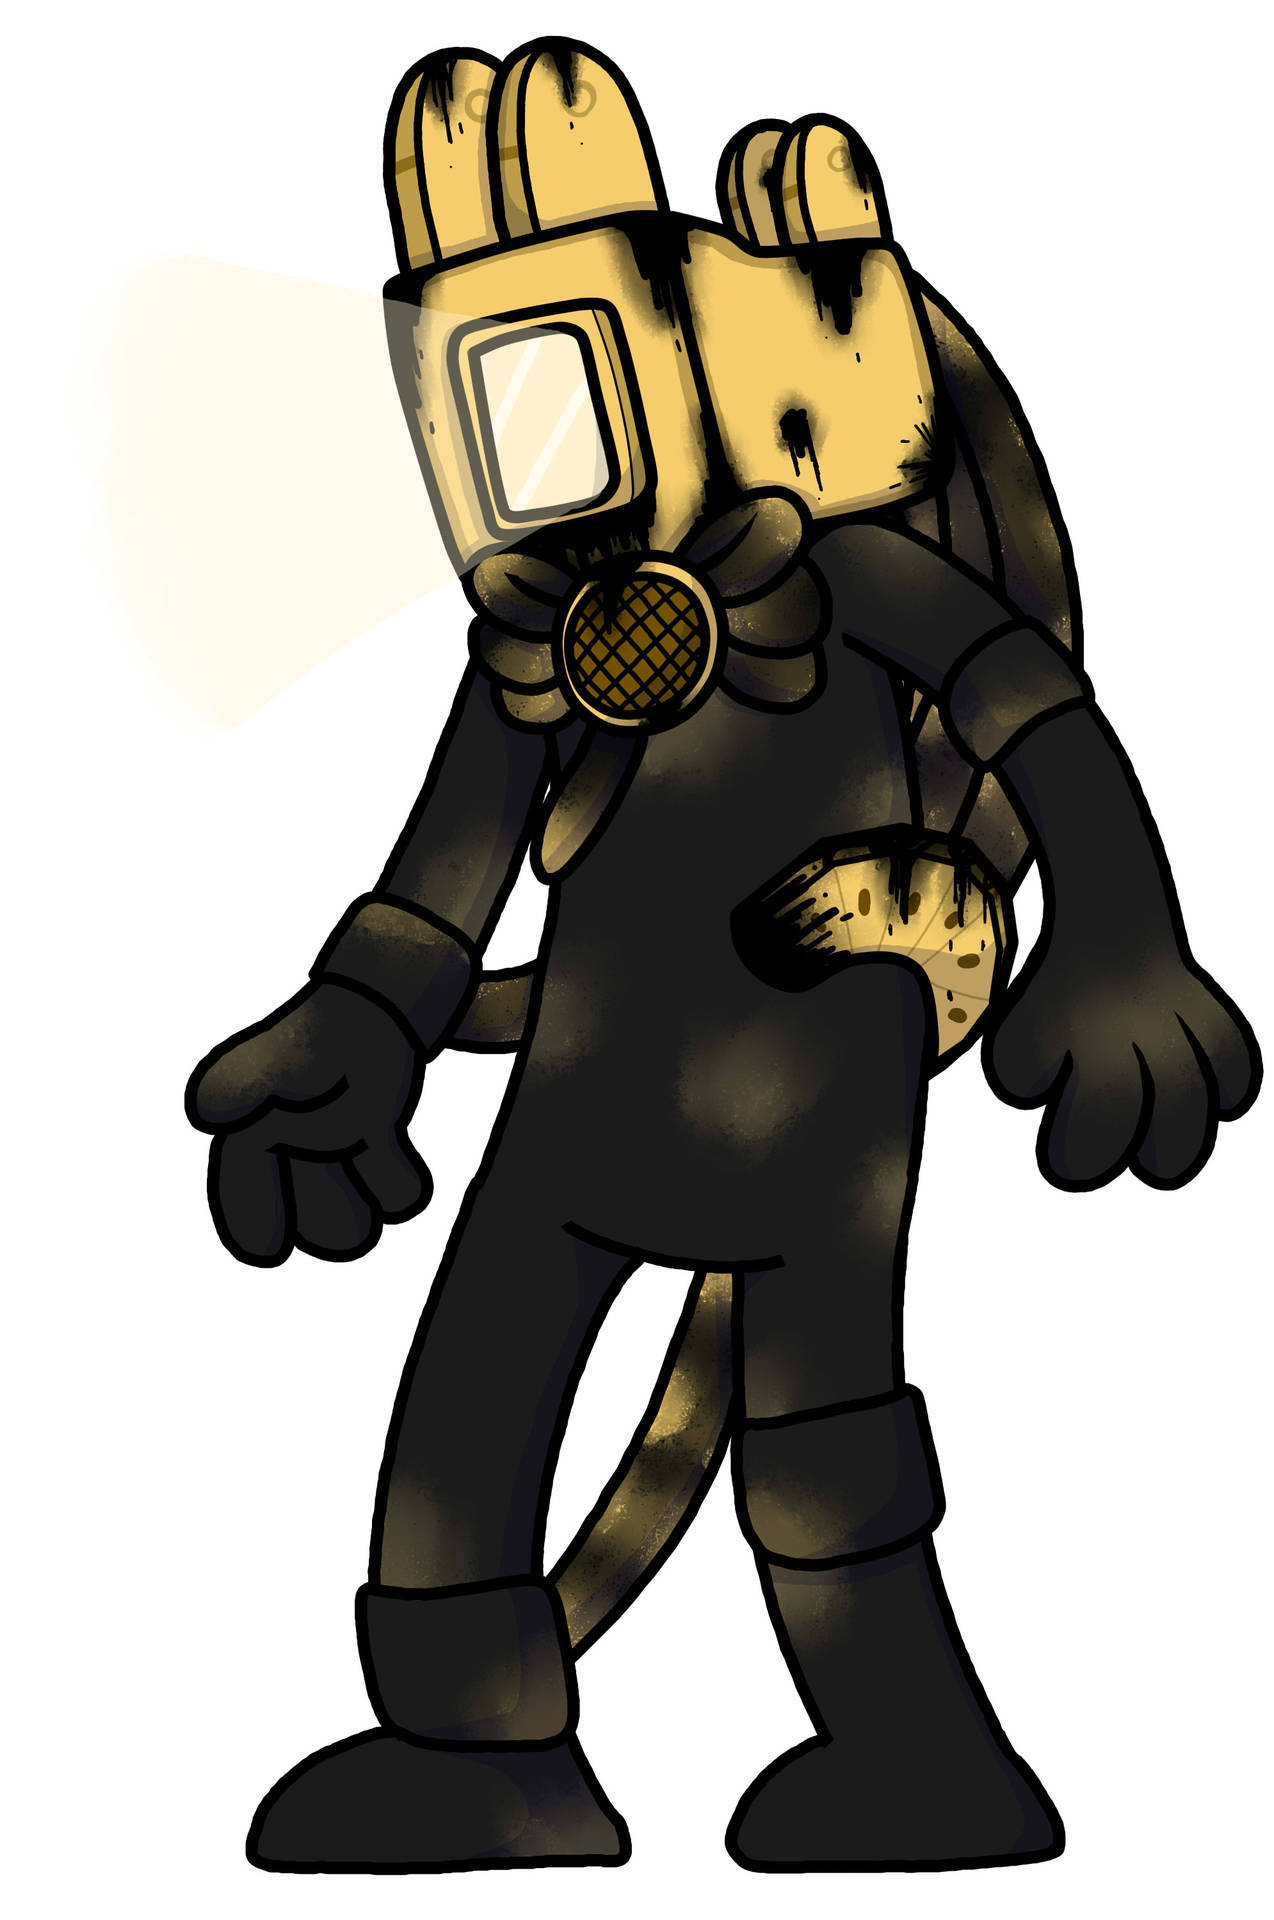 artist — Finally made a design of the projectionist for my...